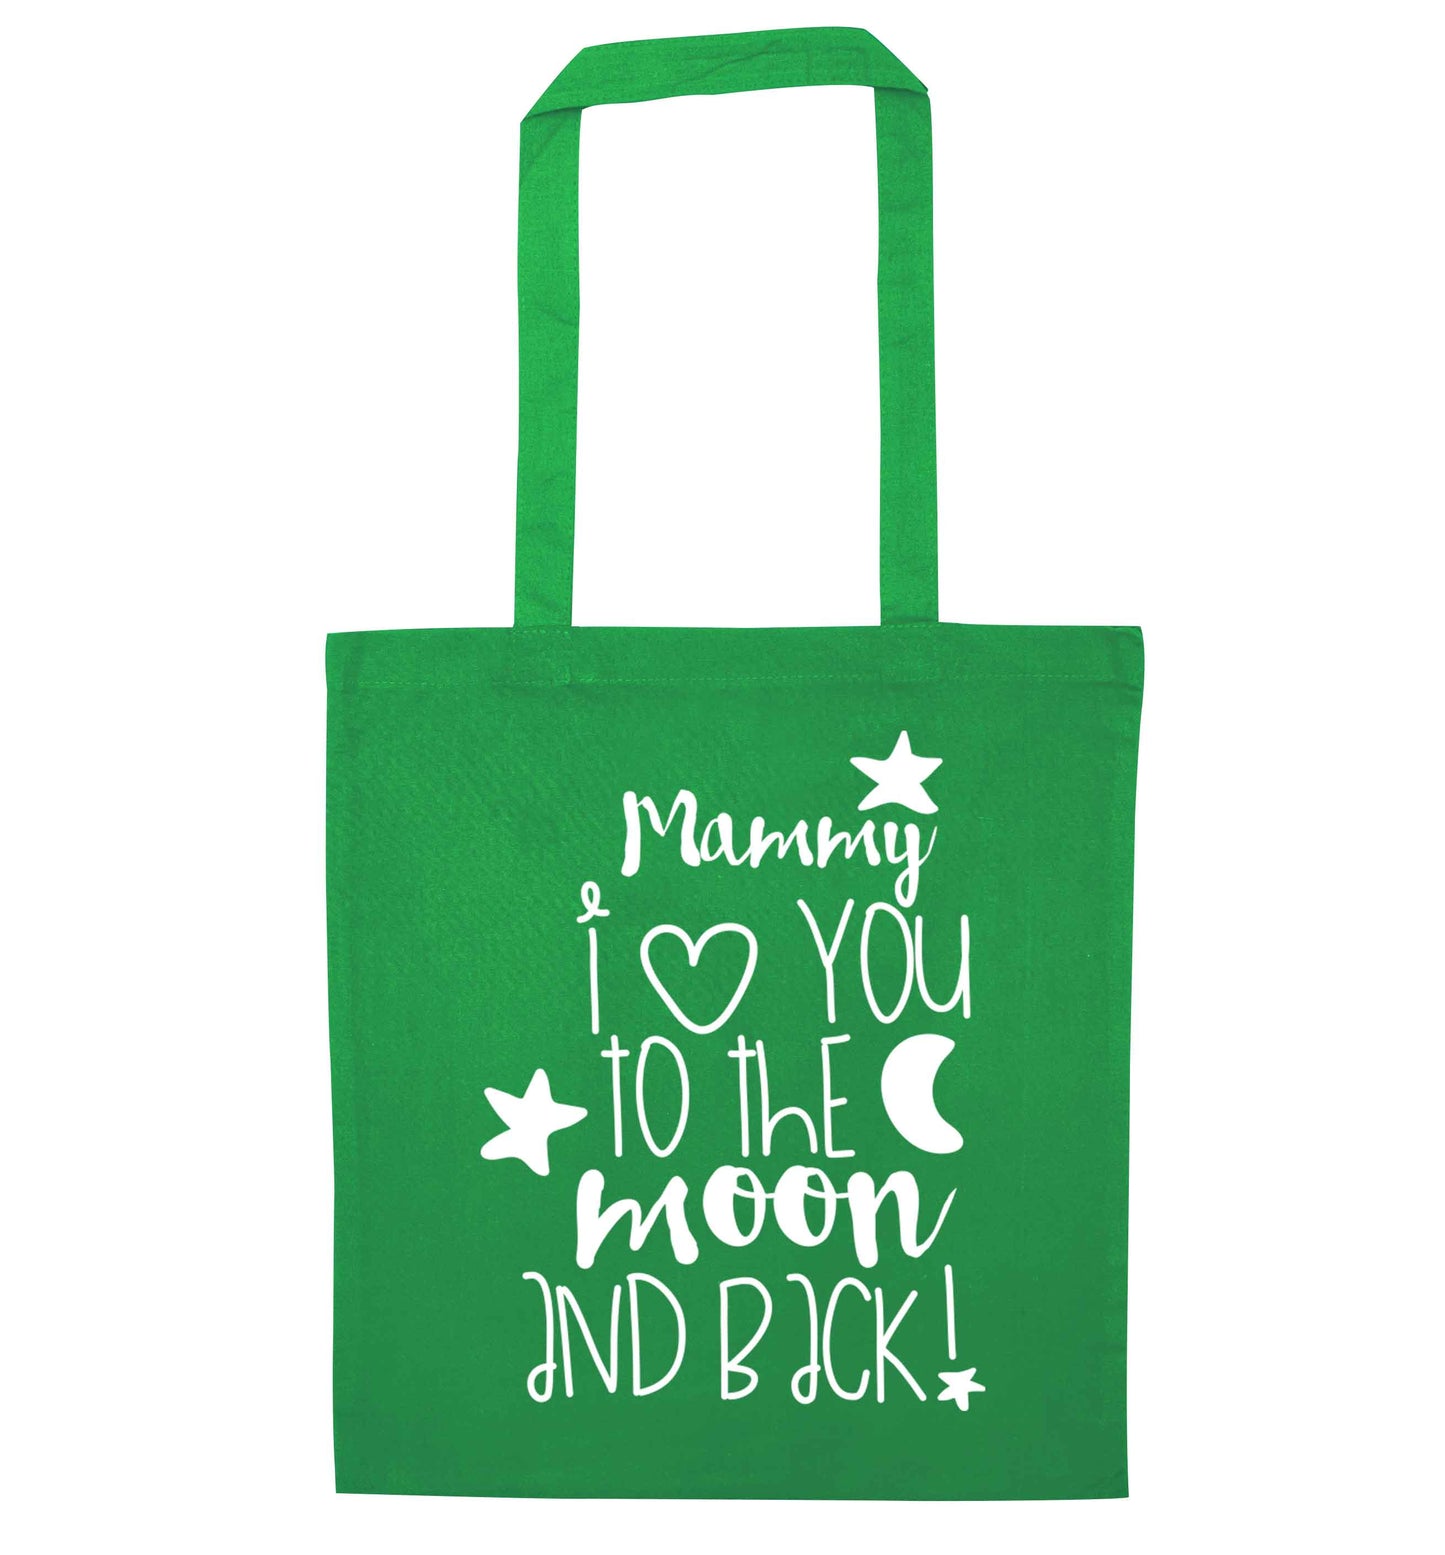 Mammy I love you to the moon and back green tote bag